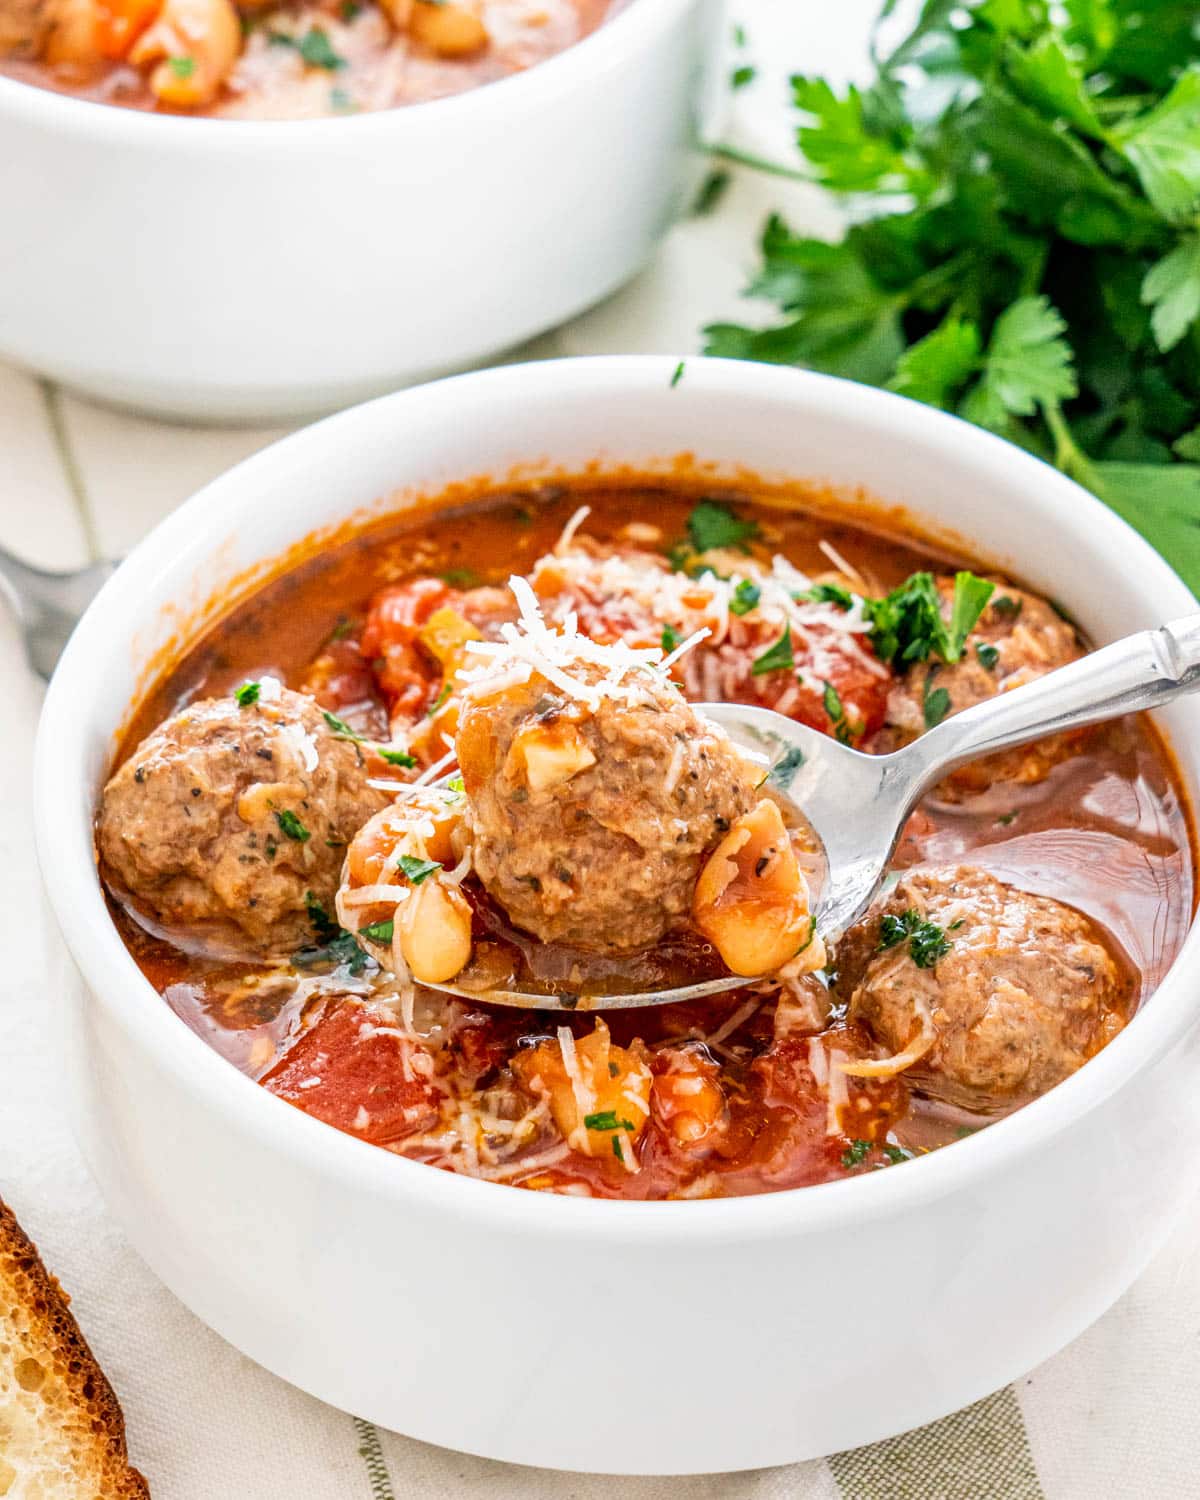 a spoon holding a meatball over a bowl loaded with soup